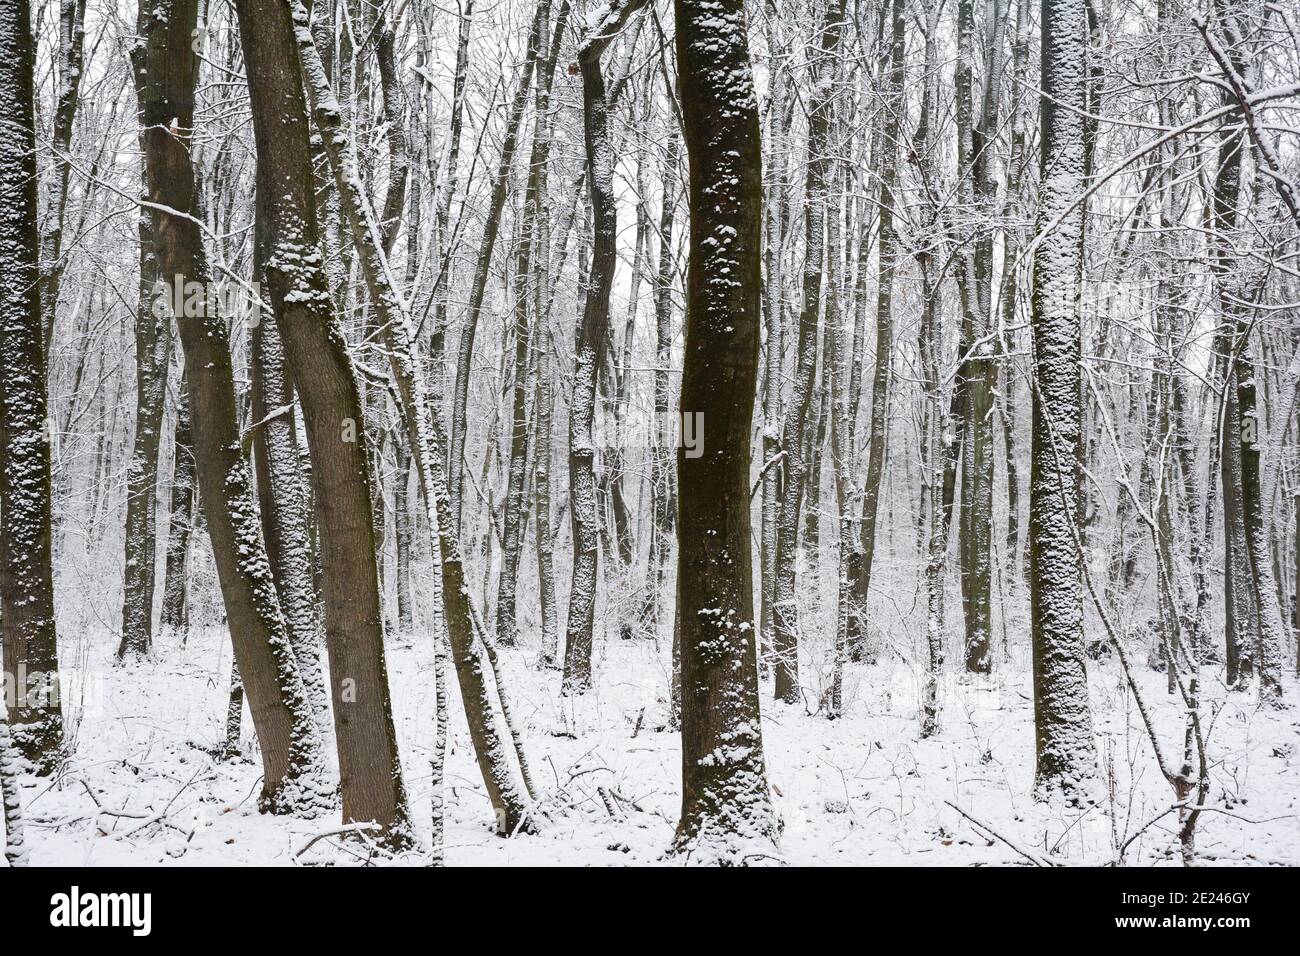 A view of a snowy deciduary thick forest in winter. The trees covered with white snow with their trunks growing close to one another in a wild woodlan Stock Photo